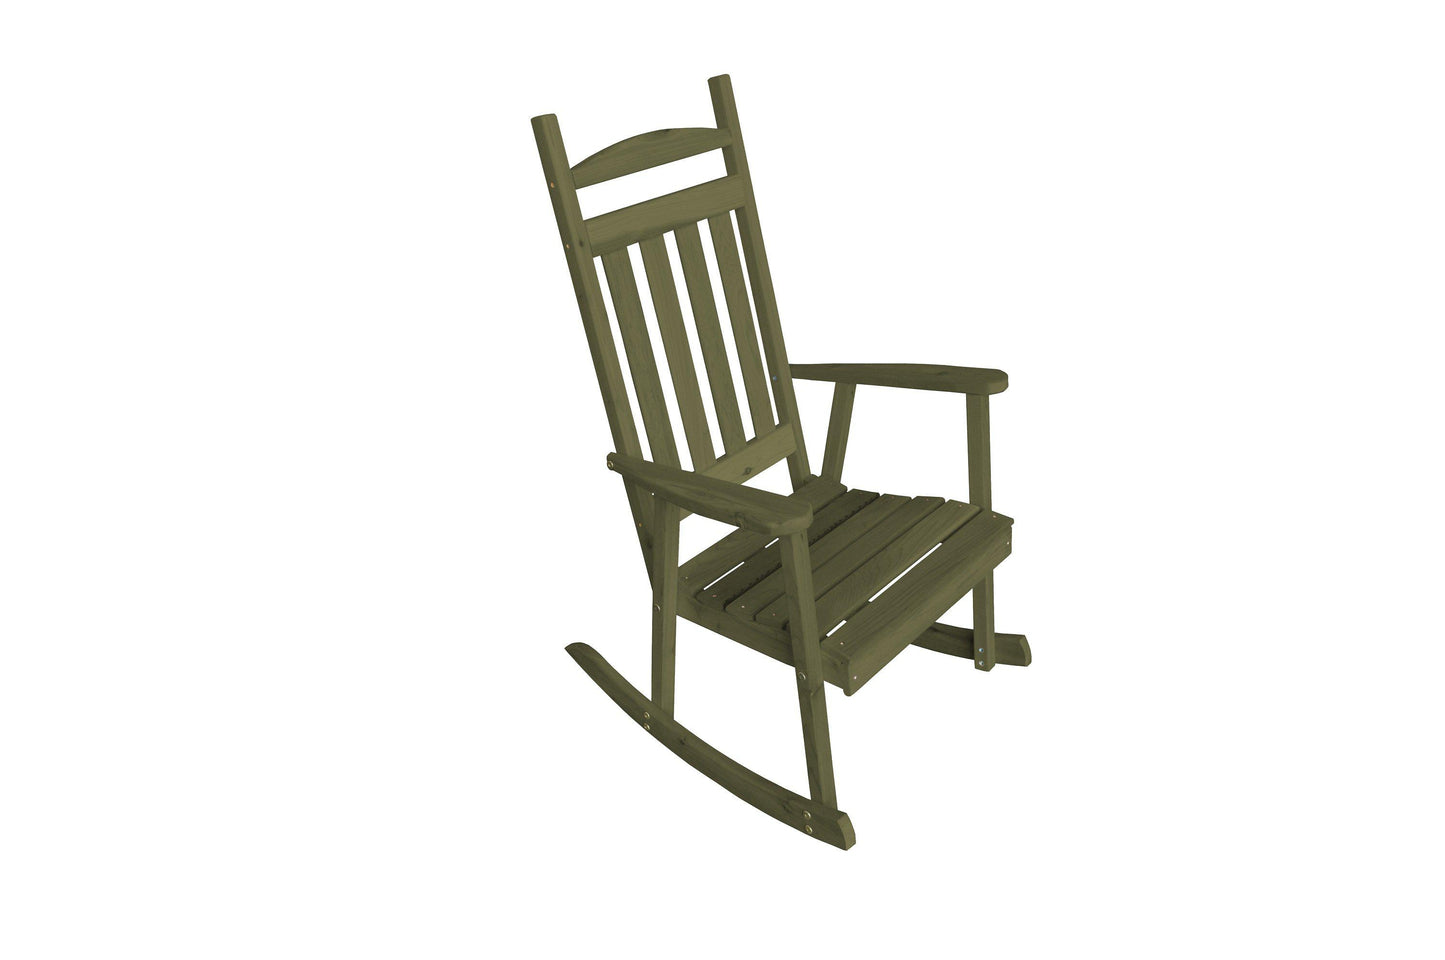 A&L FURNITURE CO. Western Red Cedar Classic Porch Rocking Chair - LEAD TIME TO SHIP 4 WEEKS OR LESS